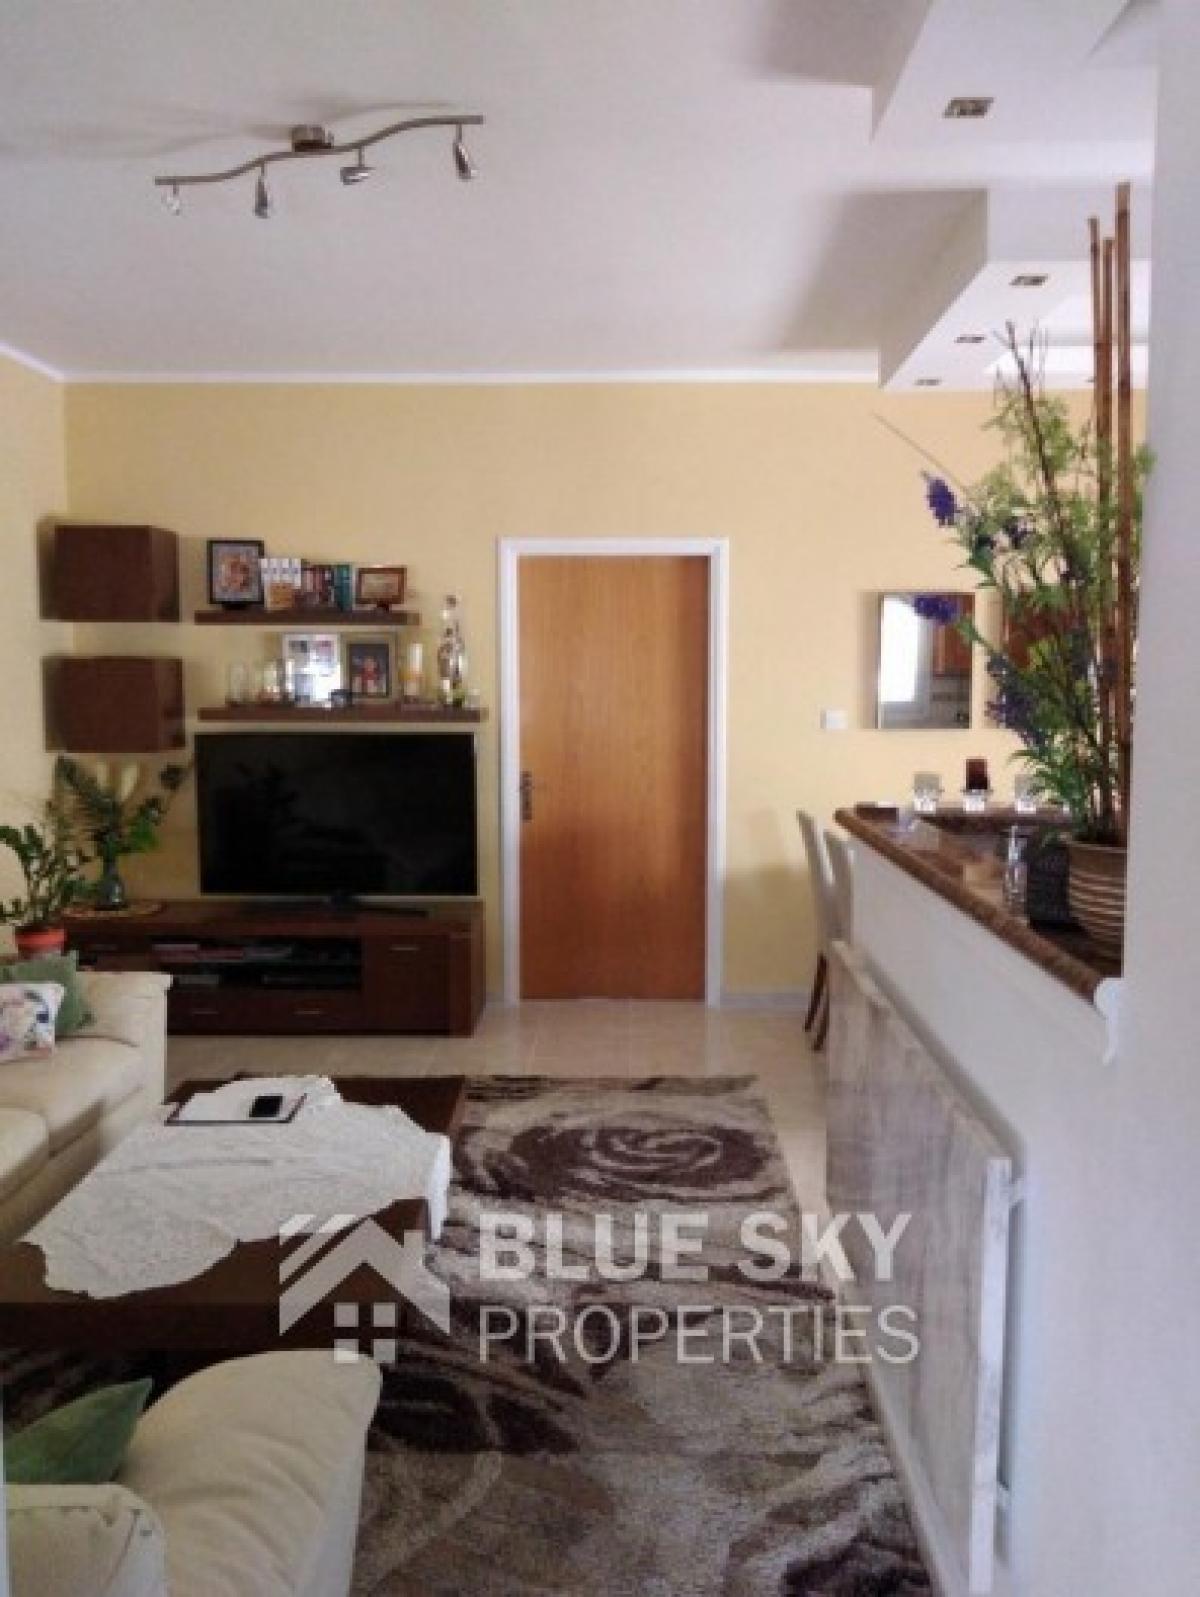 Picture of Apartment For Sale in Empa, Paphos, Cyprus